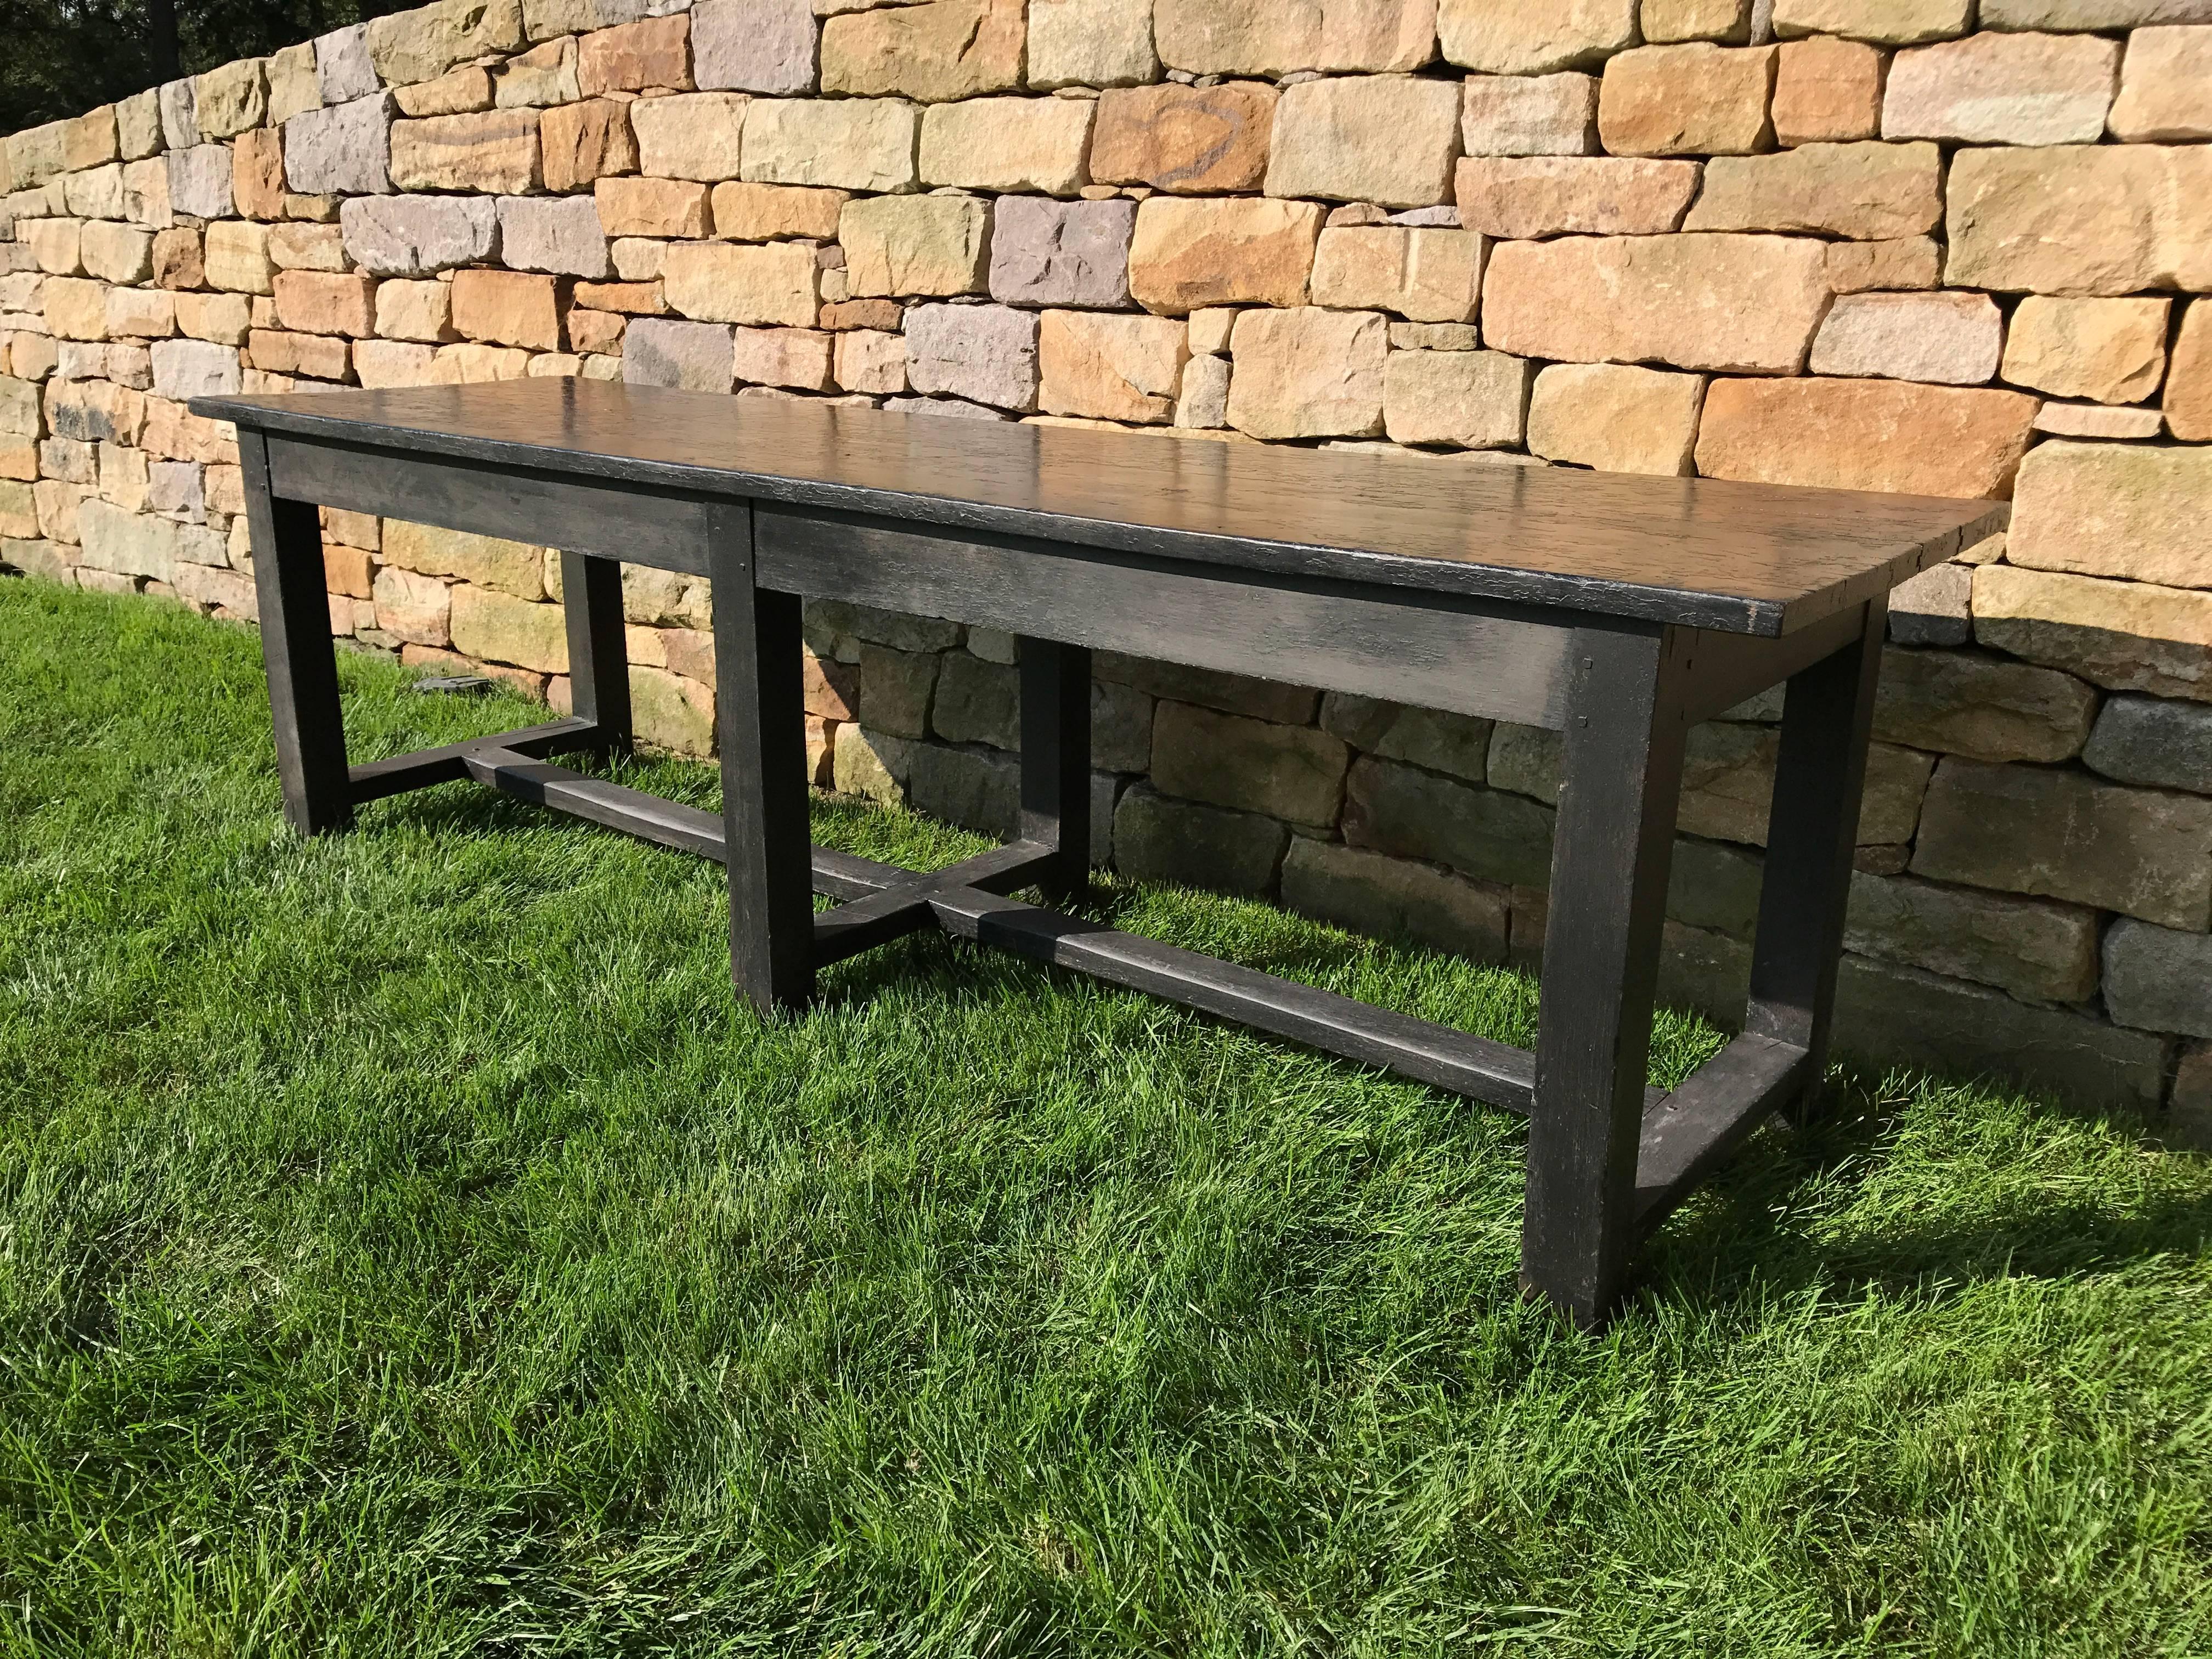 A black painted 19th century farm or work table with a distressed black painted finish. Large scale. Would work well as a work table or kitchen island.